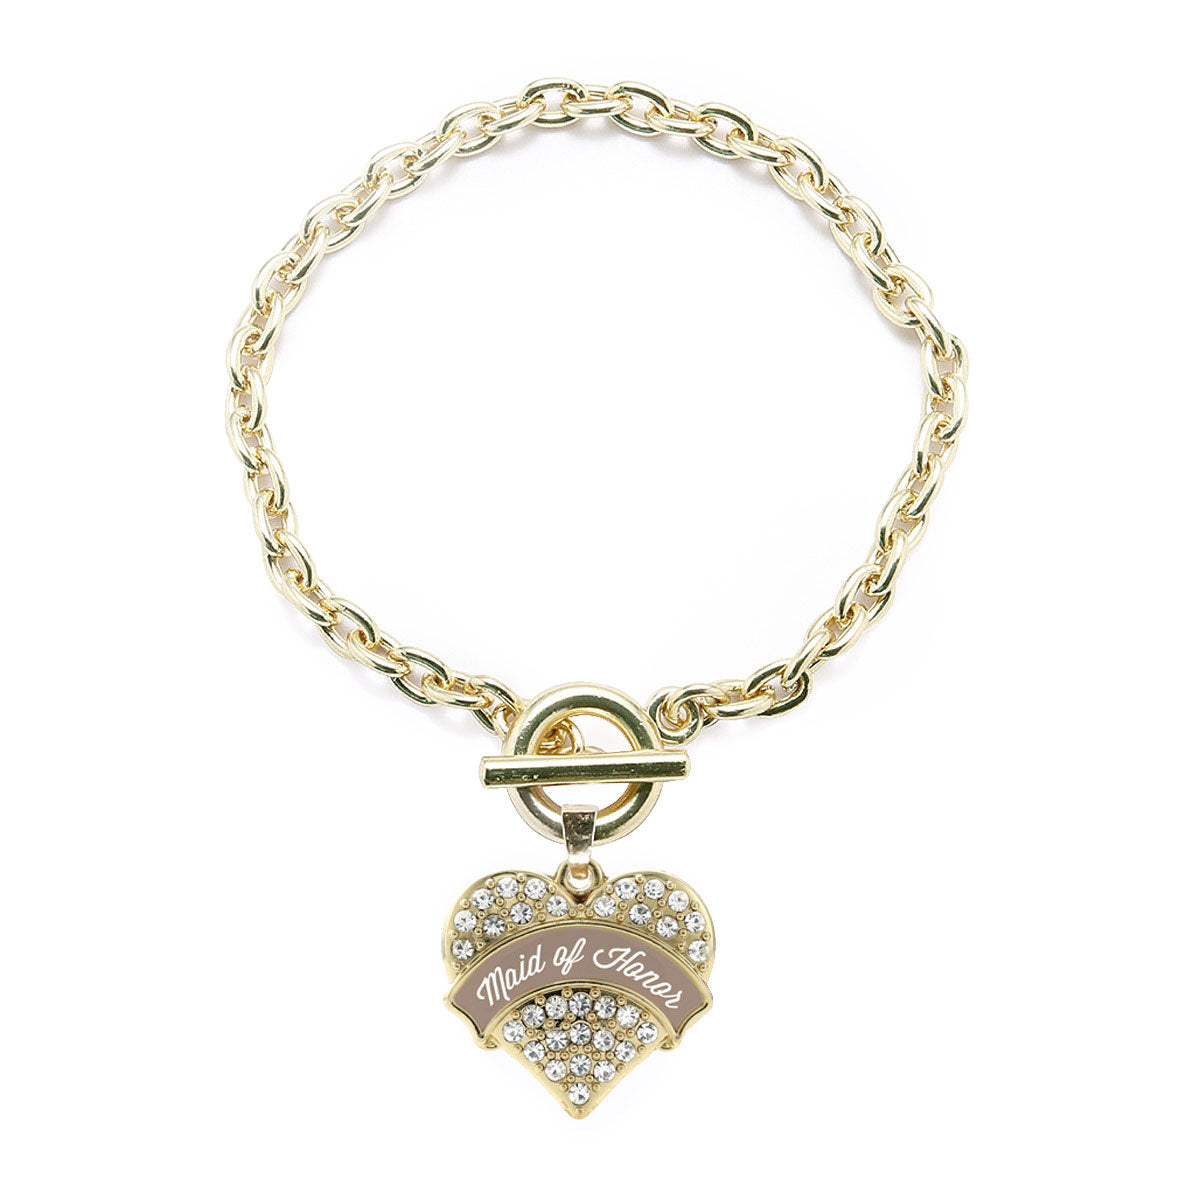 Gold Brown and White Maid of Honor Pave Heart Charm Toggle Bracelet